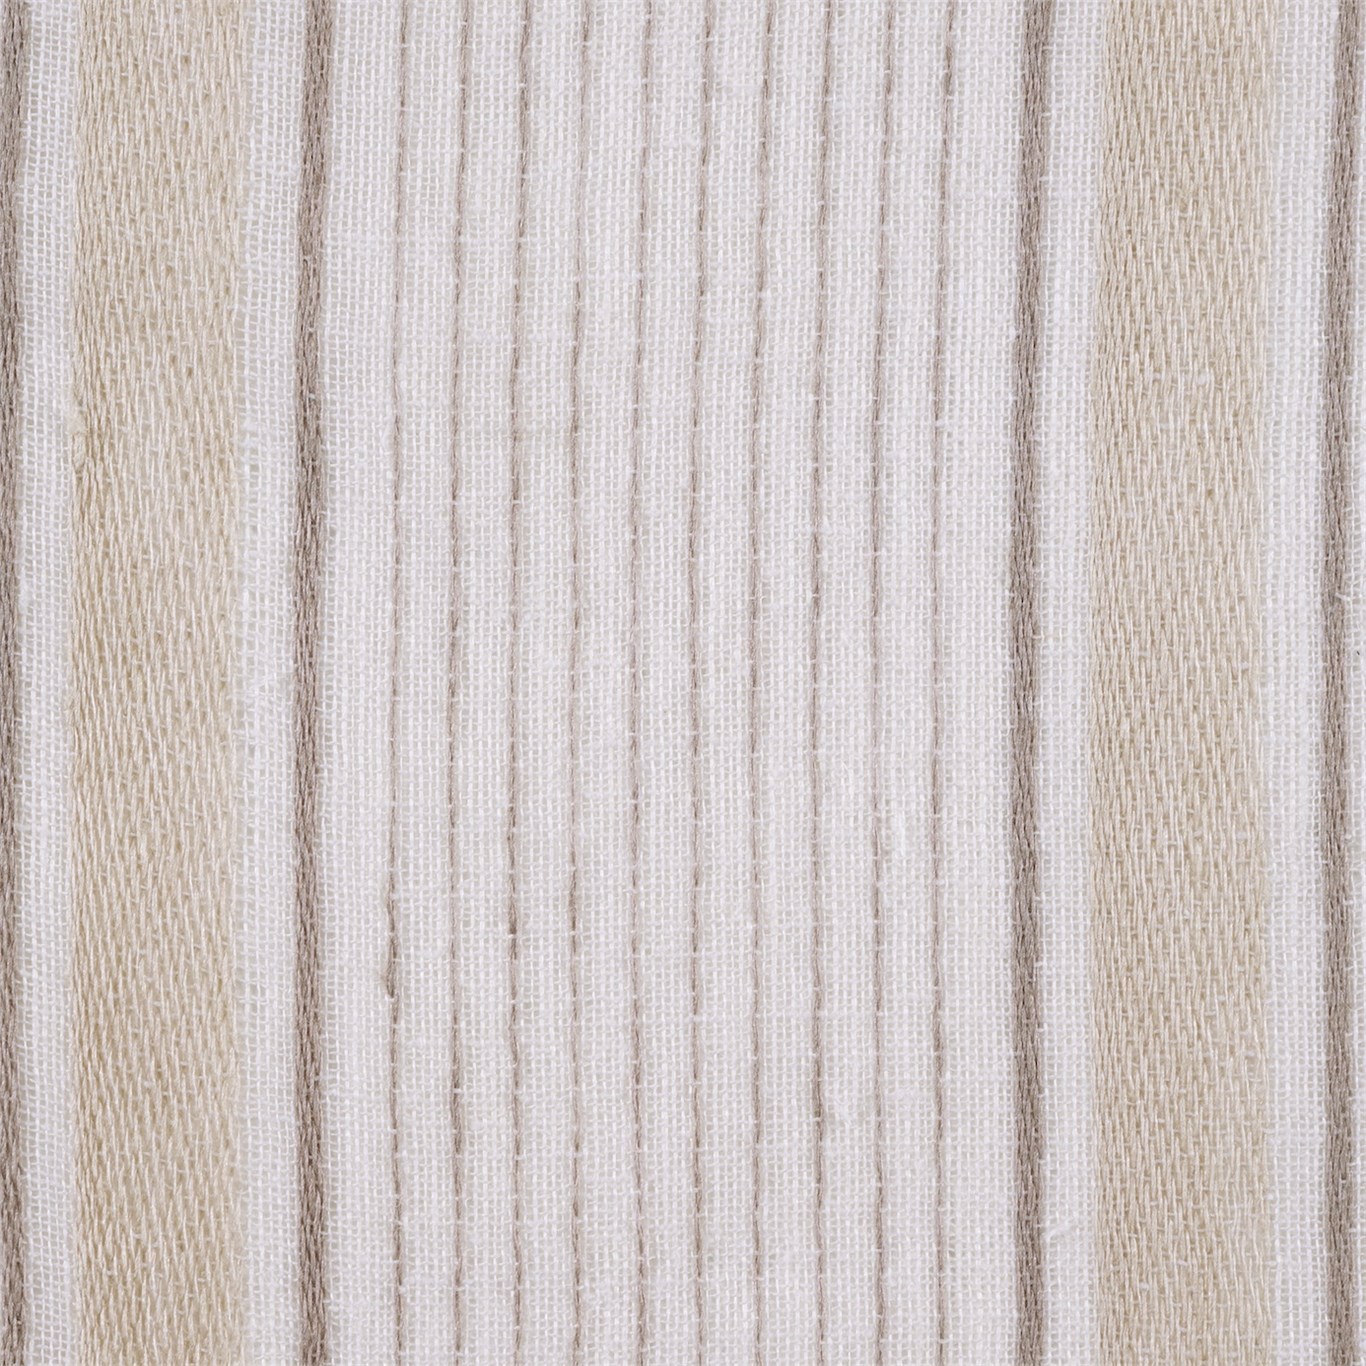 Purity Voiles Hemp/Ivory/Pebble Fabric by HAR